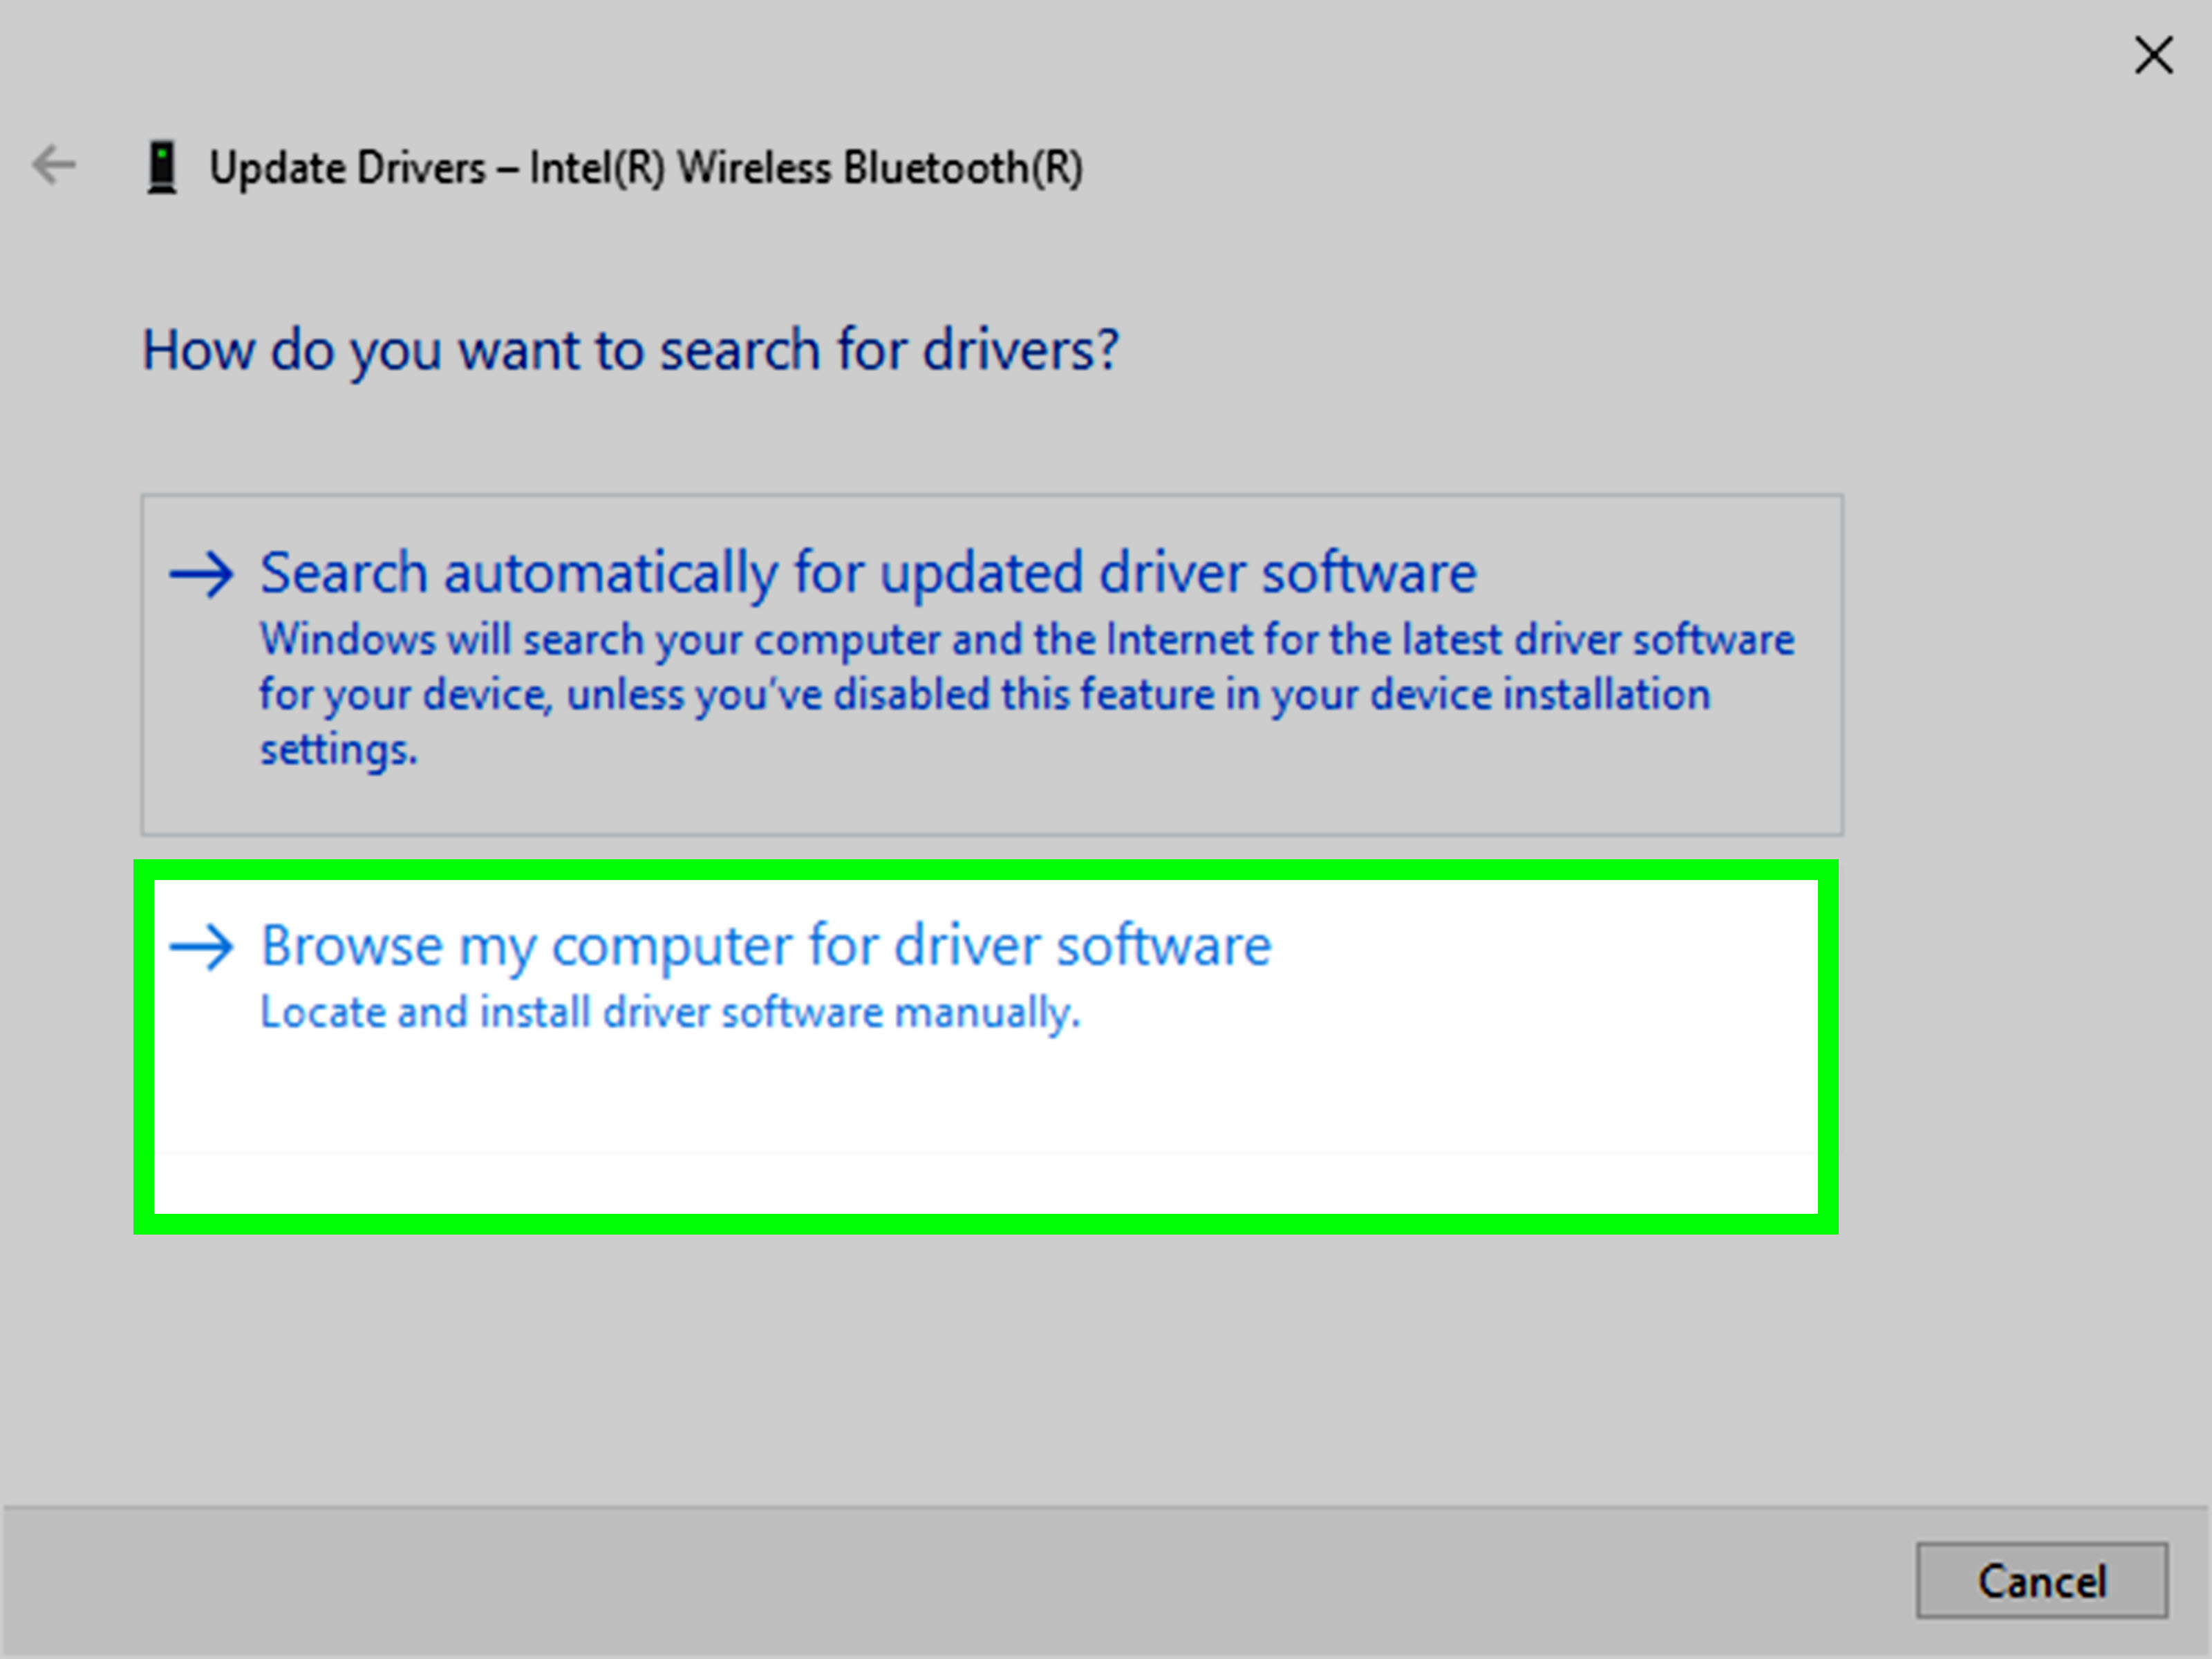 Wait for the system to search and install the latest driver updates.
Restart your computer.